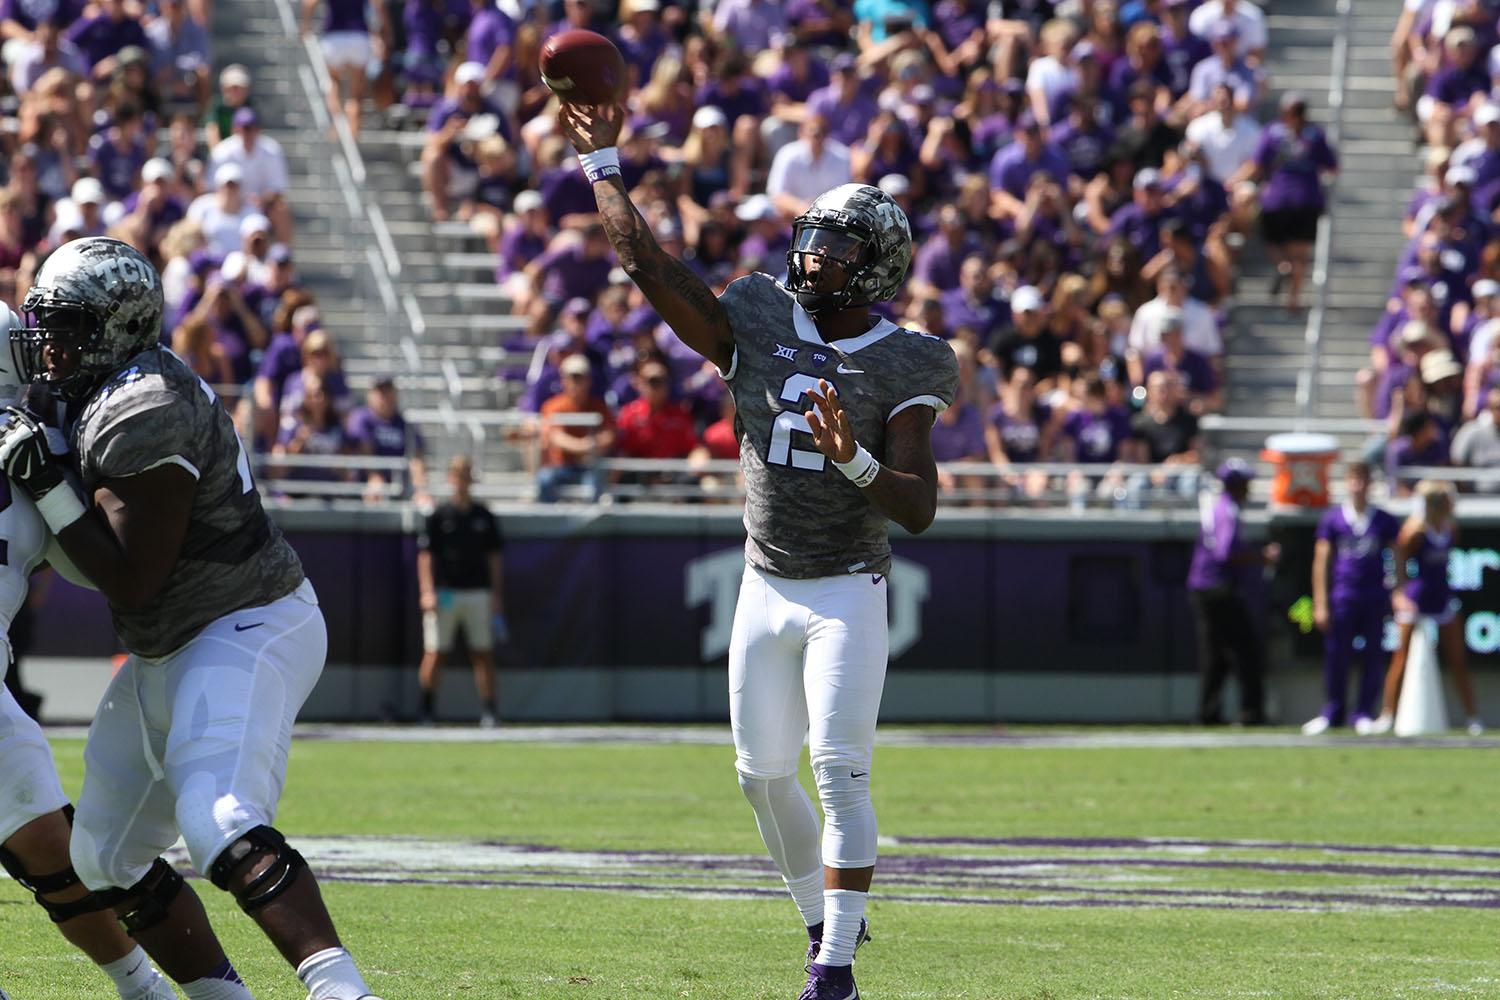 Nine+different+Horned+Frogs+scored+touchdowns+in+Saturday%E2%80%99s+70-7+win+over+Stephen+F.+Austin+in+the+home+opener+at+Amon+G.+Carter+Stadium.